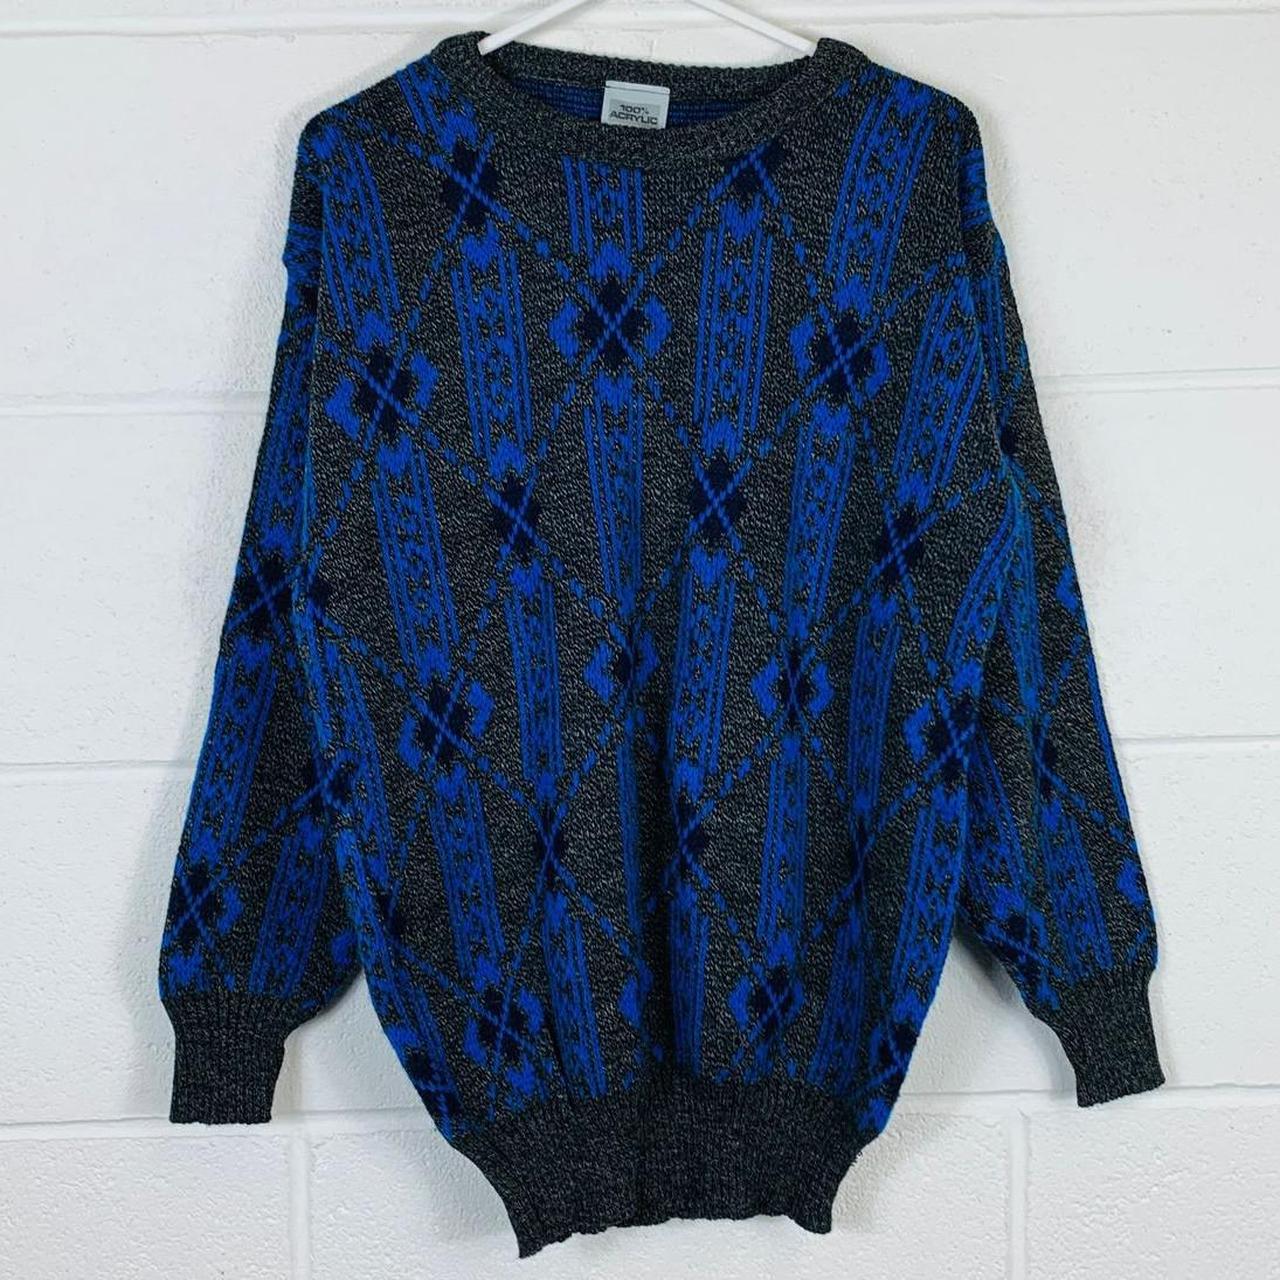 Product Image 2 - Vintage abstract knitted jumper

Blue and